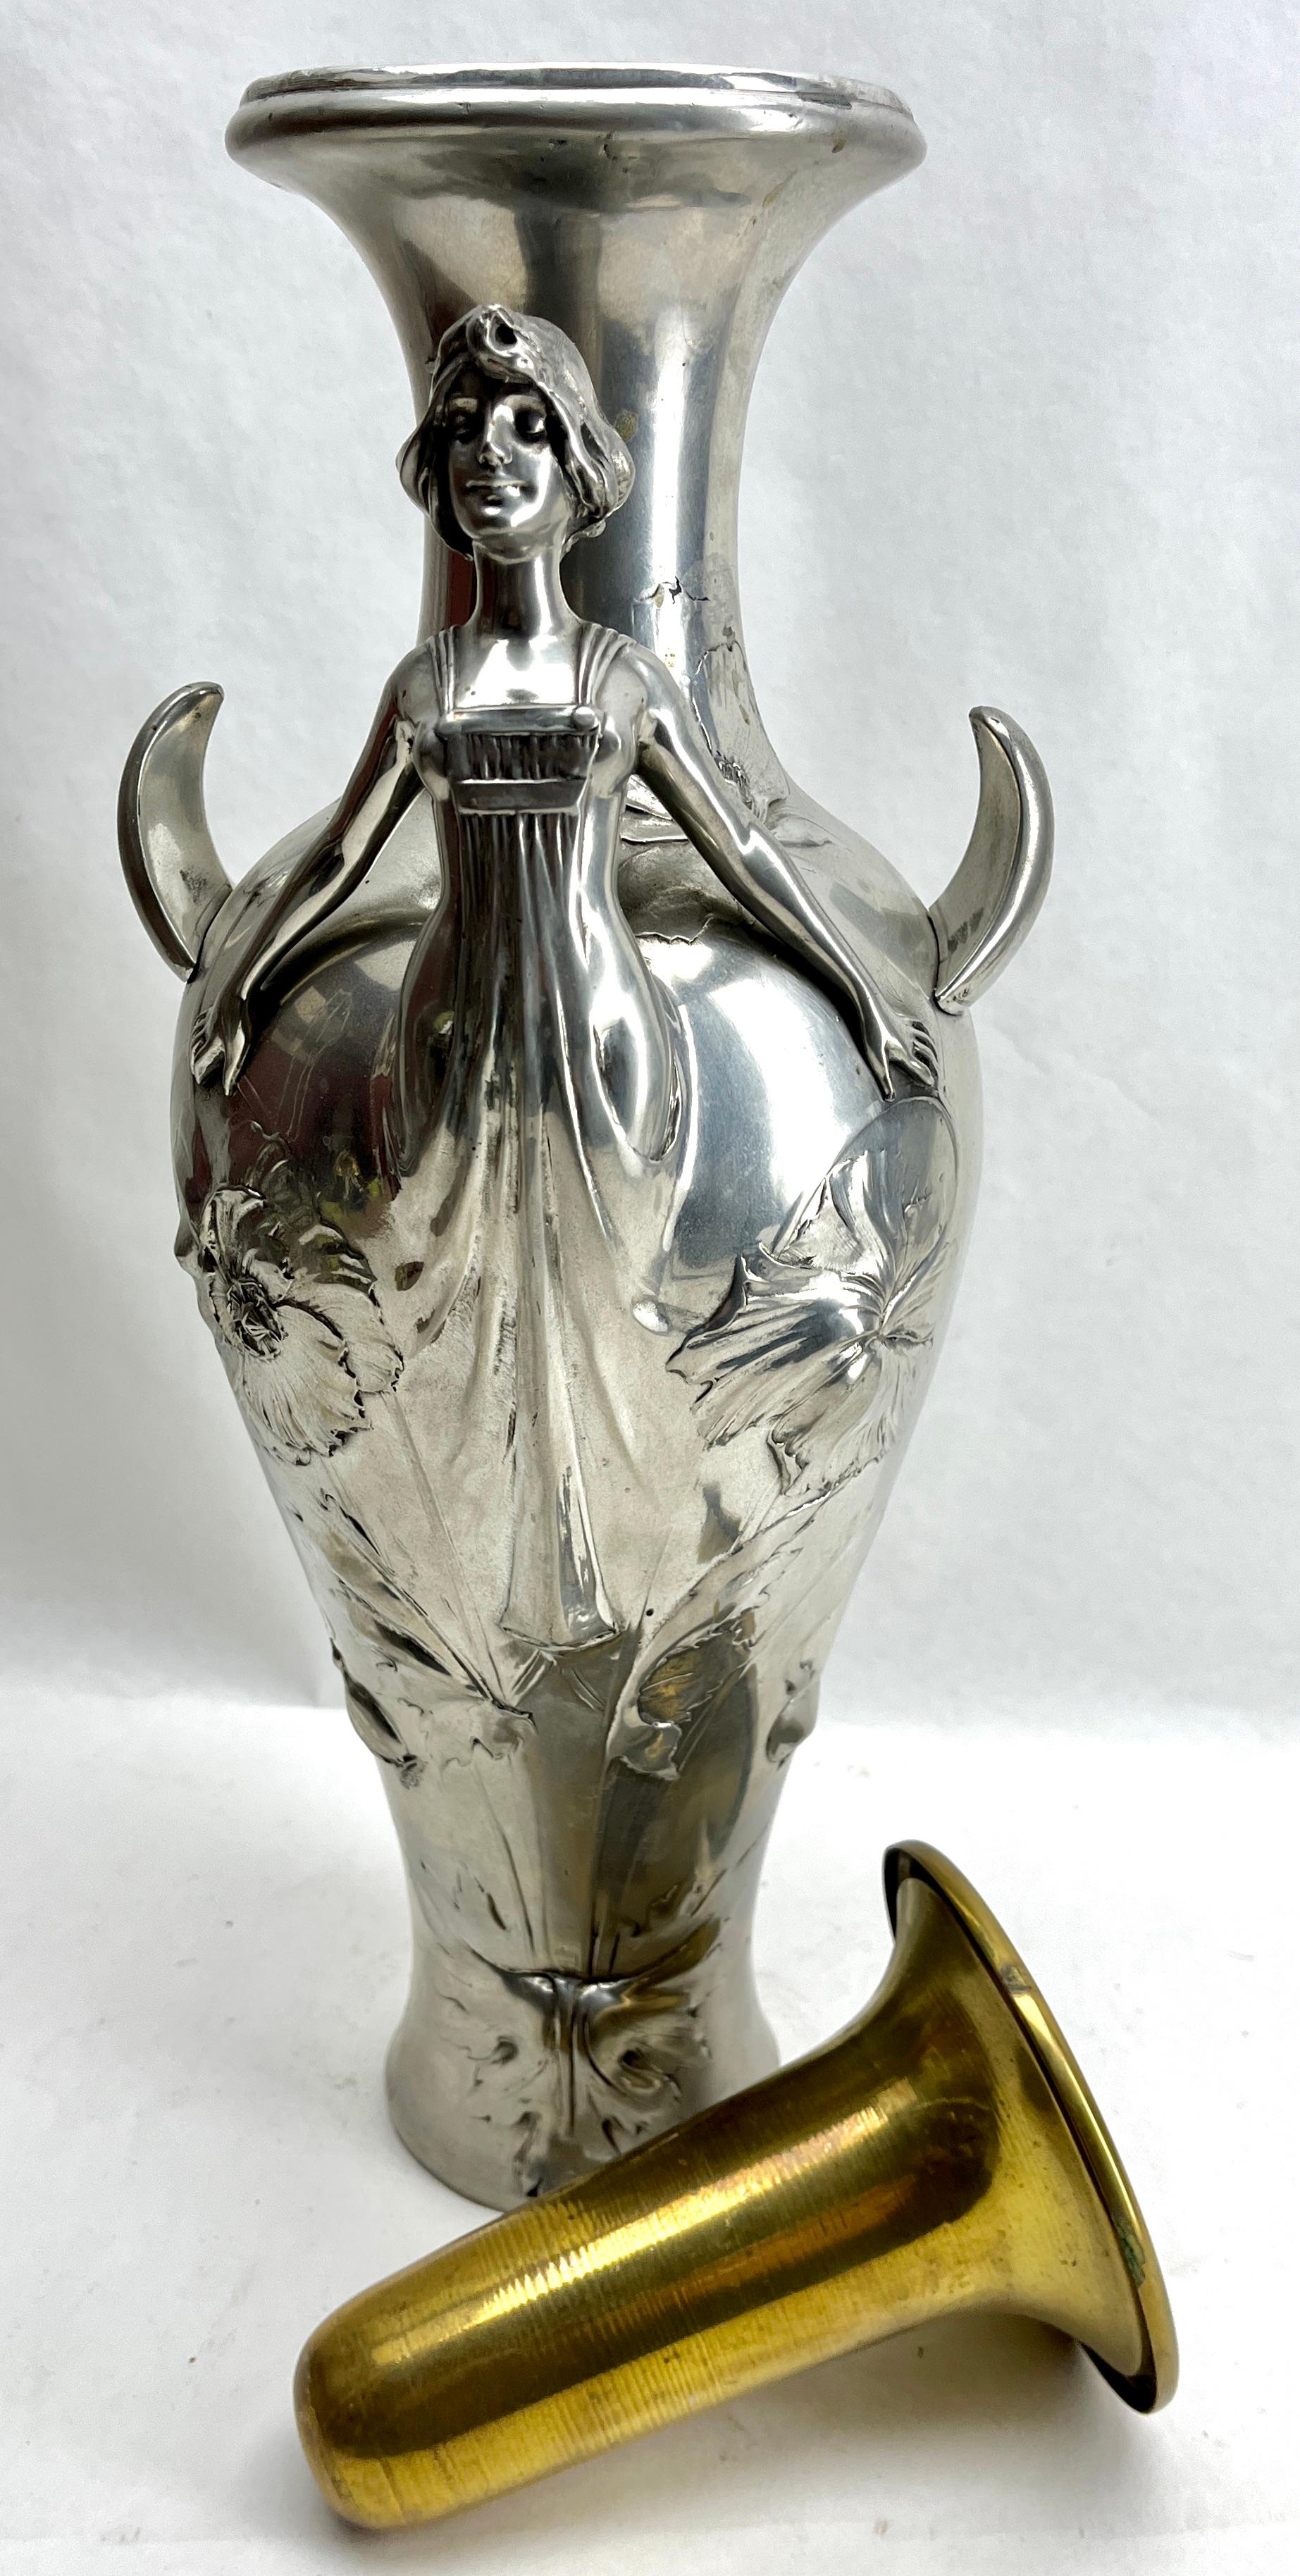 Hand-Crafted Art Nouveau Large Richly Decorated Vase with Flowers and Female Figure. For Sale